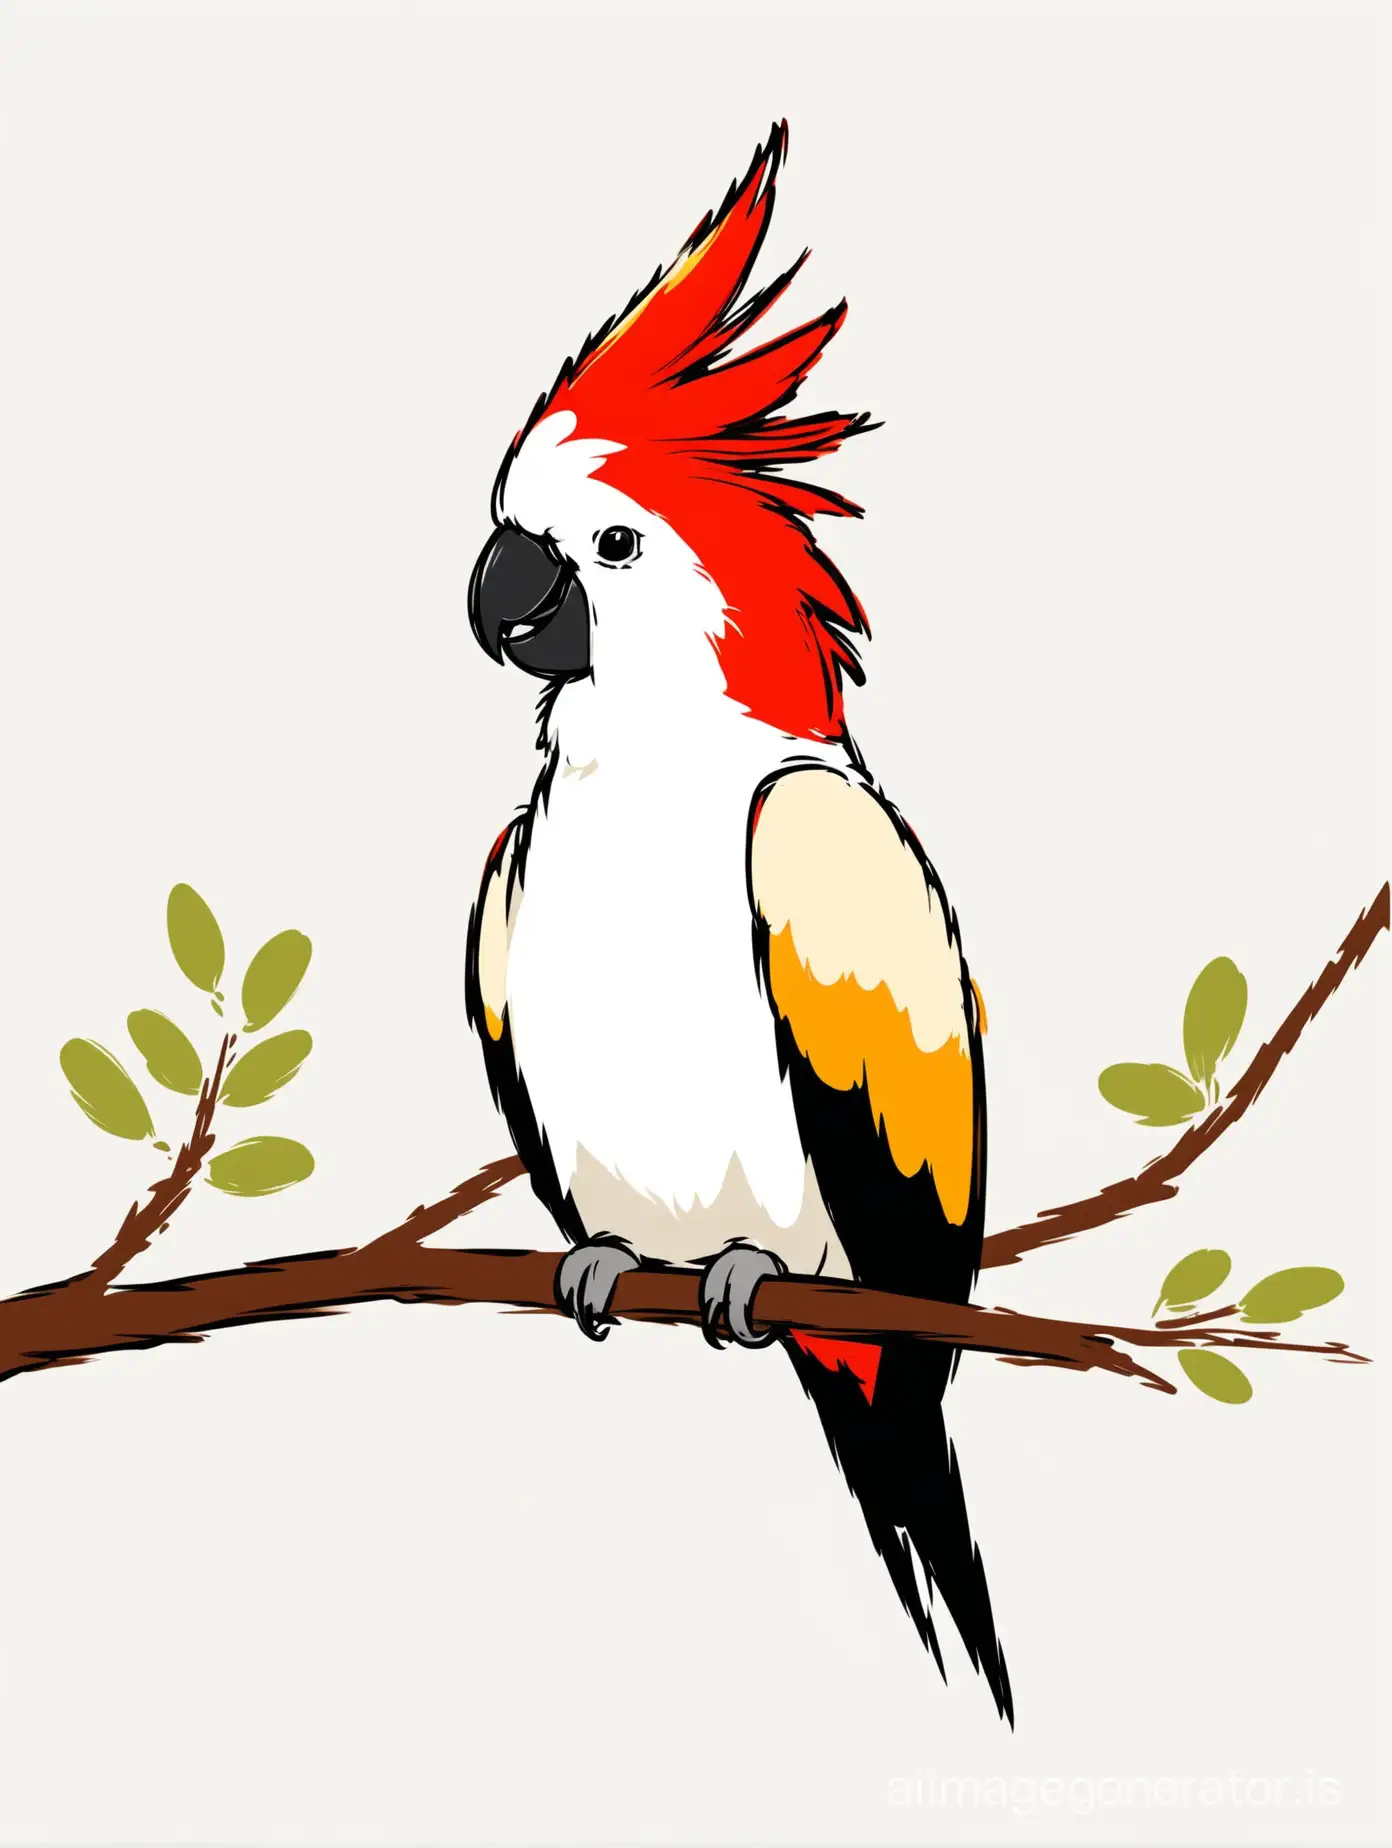 Vibrant-Multicolored-Cockatoo-with-Red-Crest-Perched-on-Branch